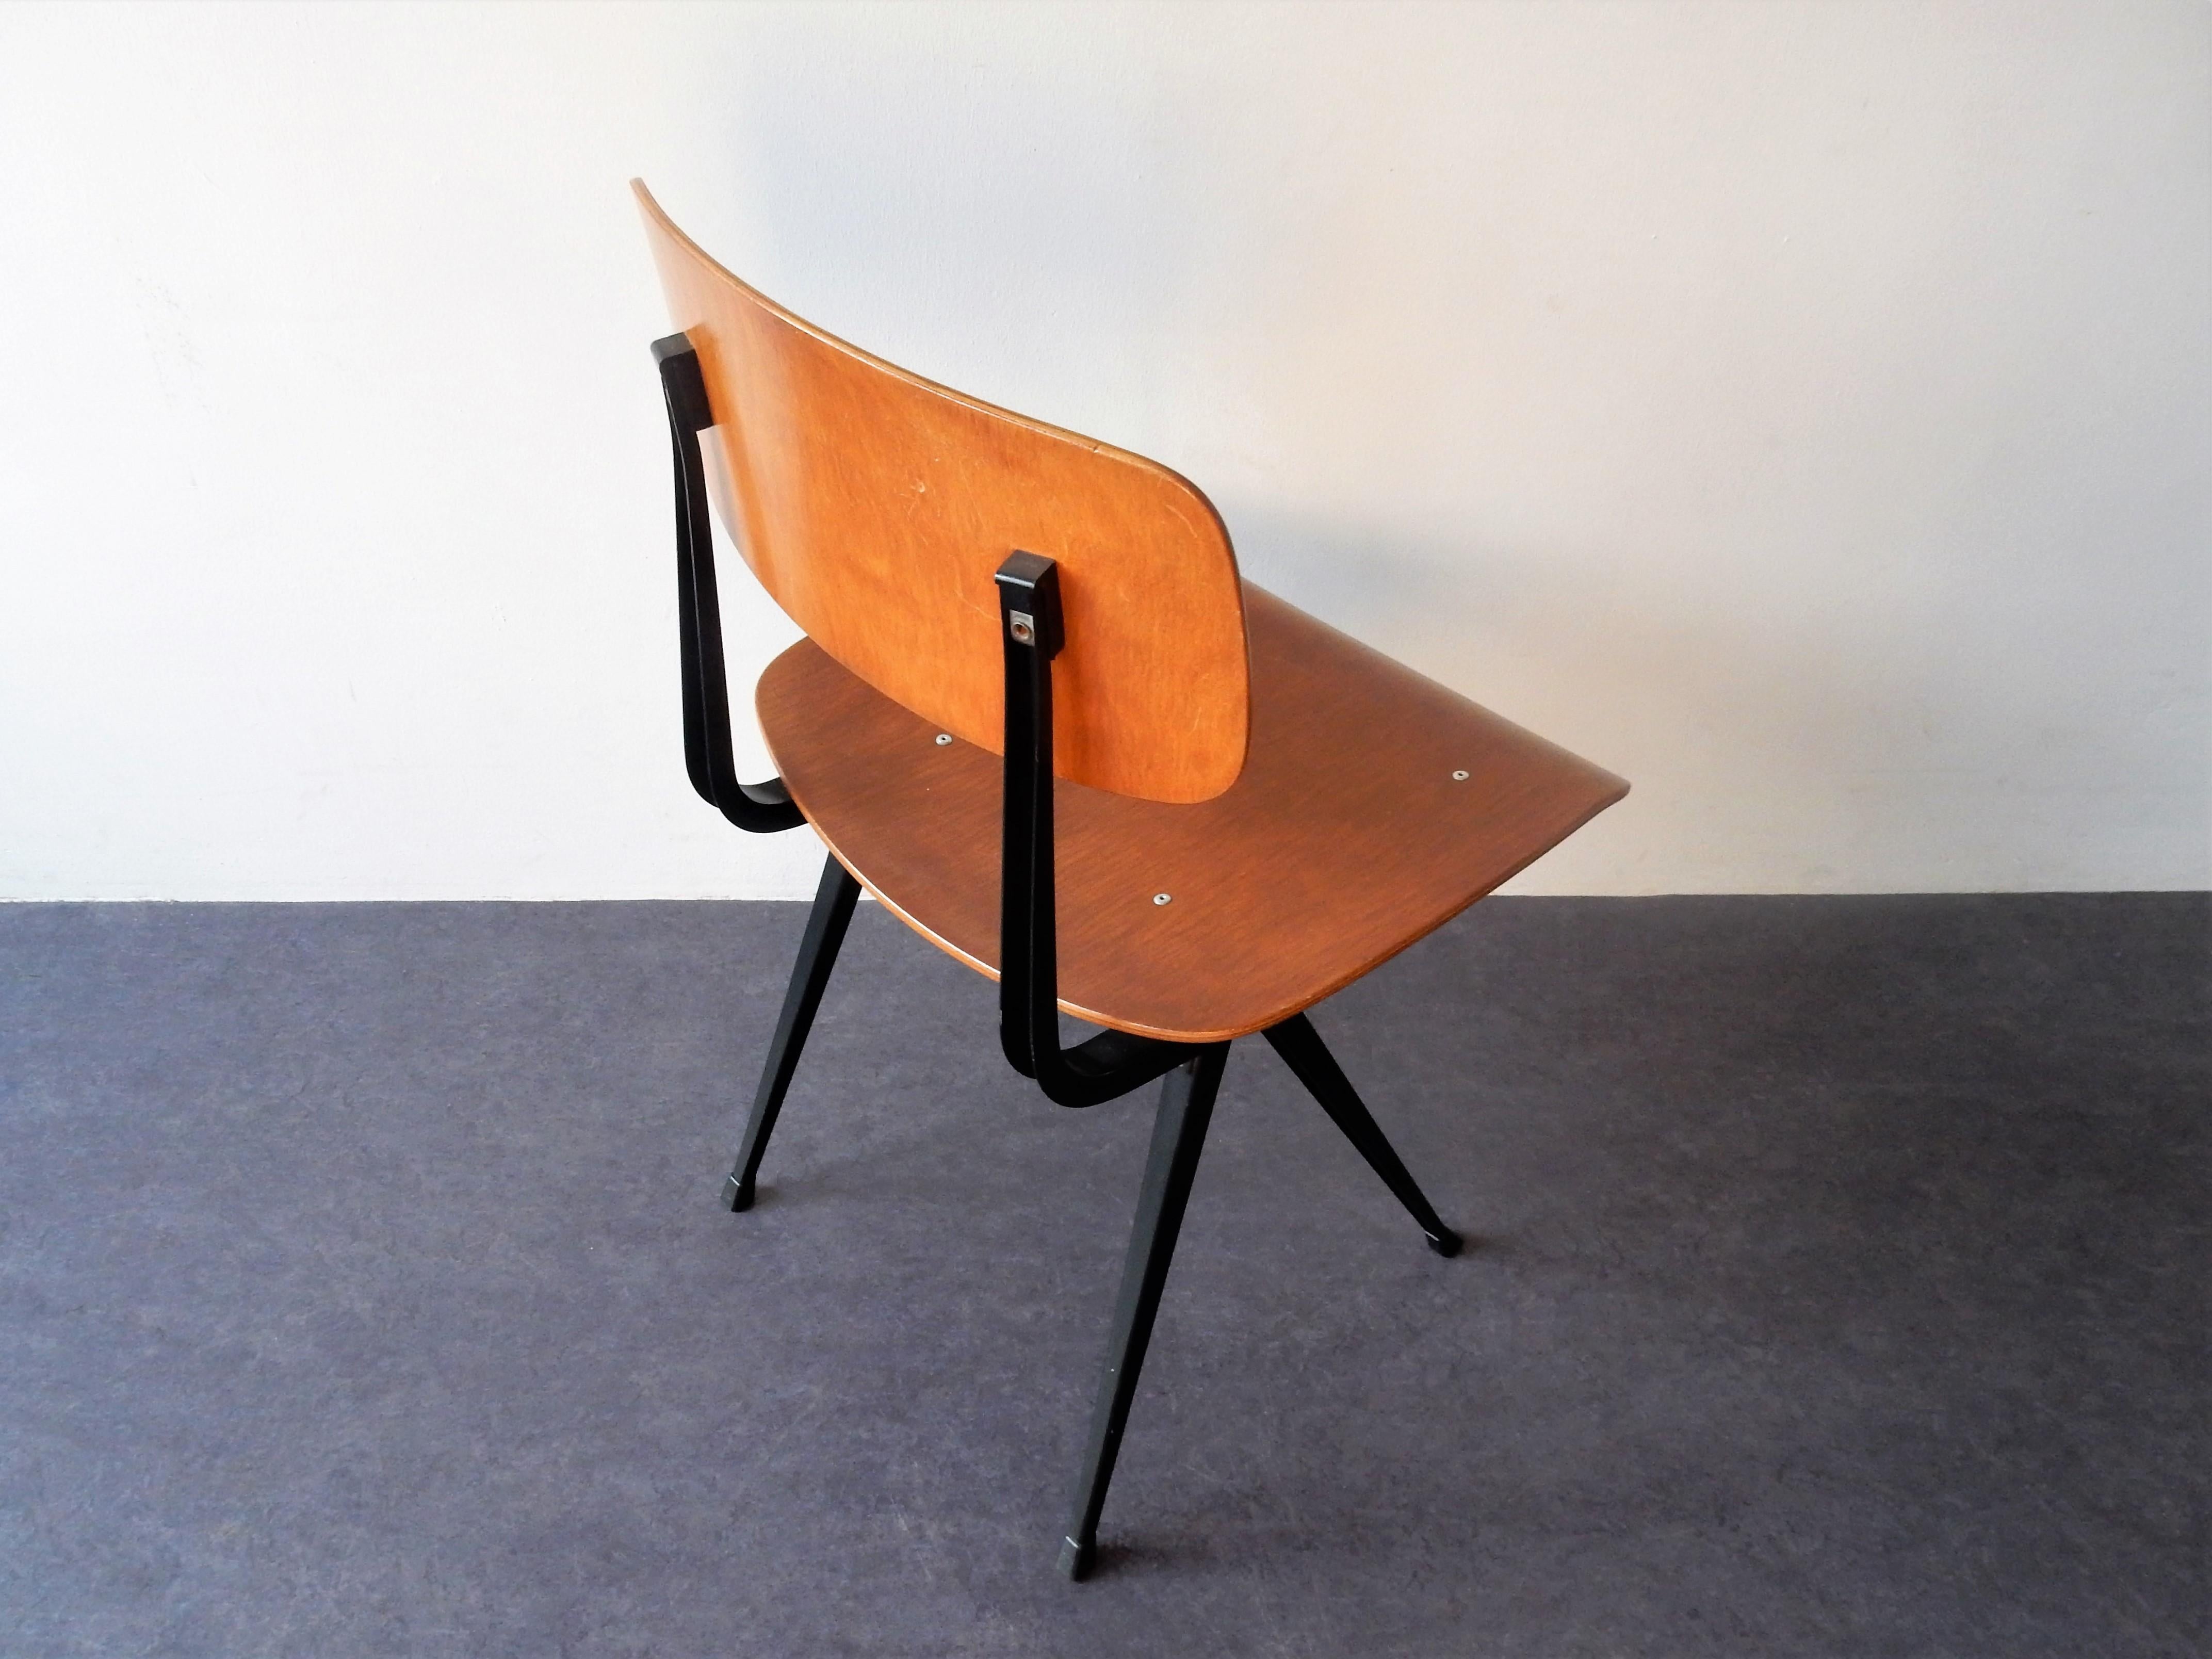 Plywood 'Result' Chair by Friso Kramer for Ahrend de Cirkel, 2 Available, 1960s-1970s